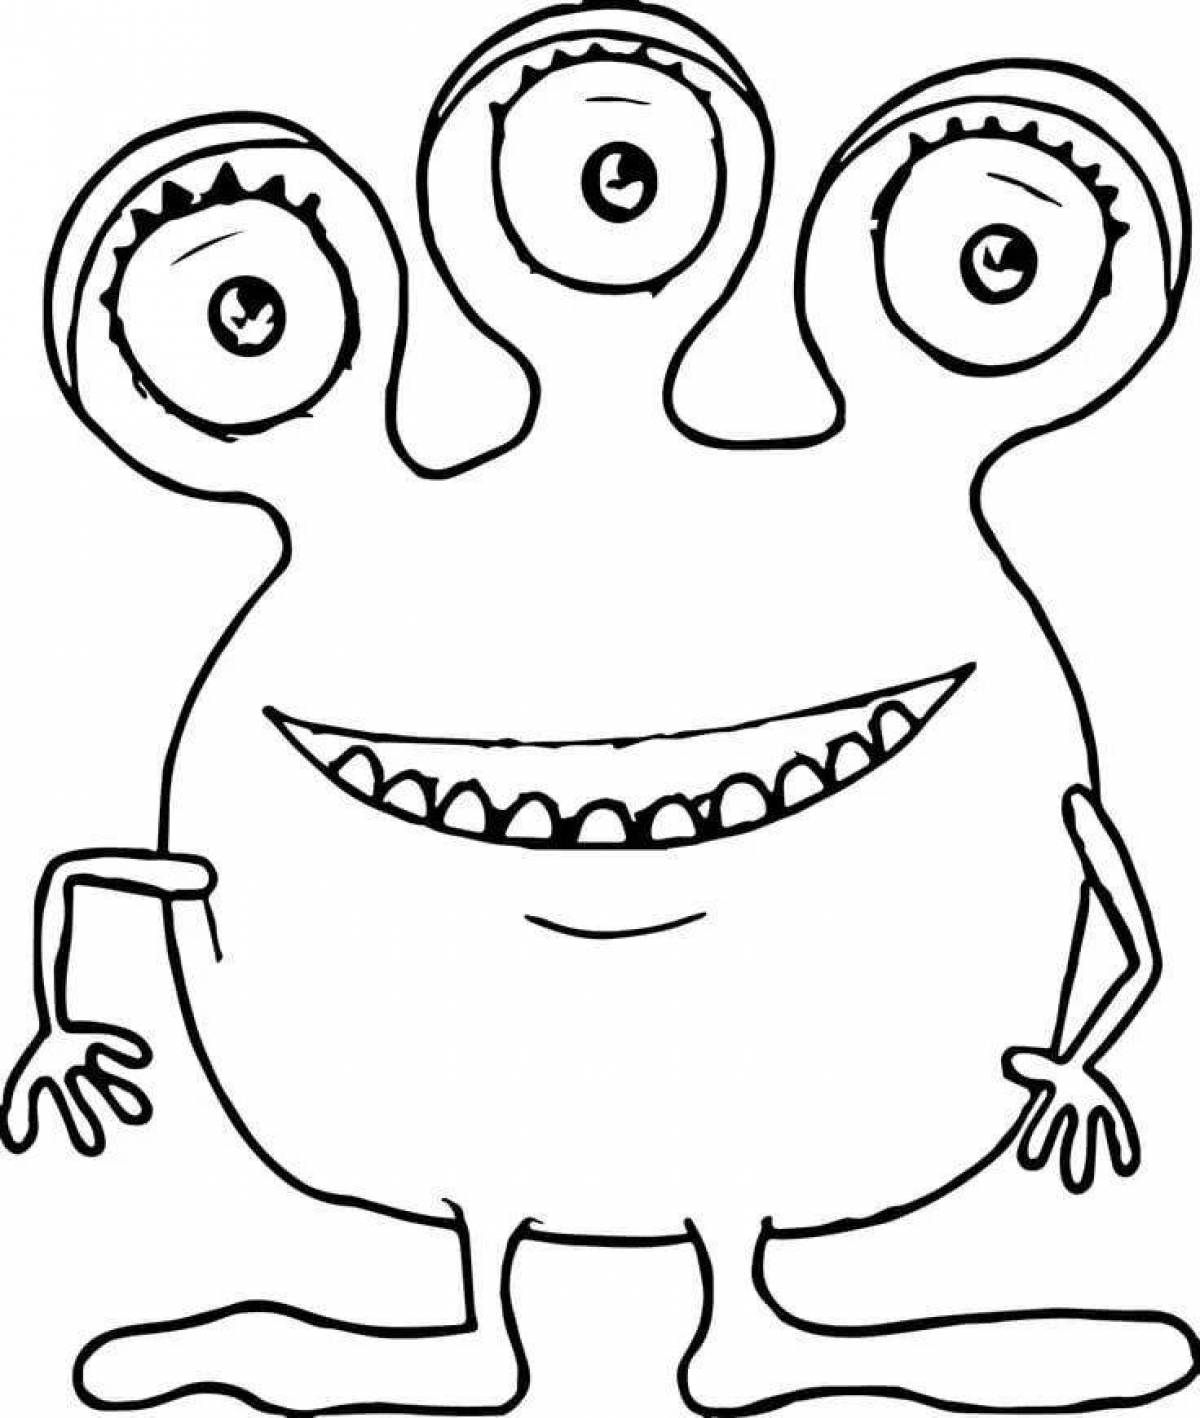 Glowing rainbow monsters coloring page